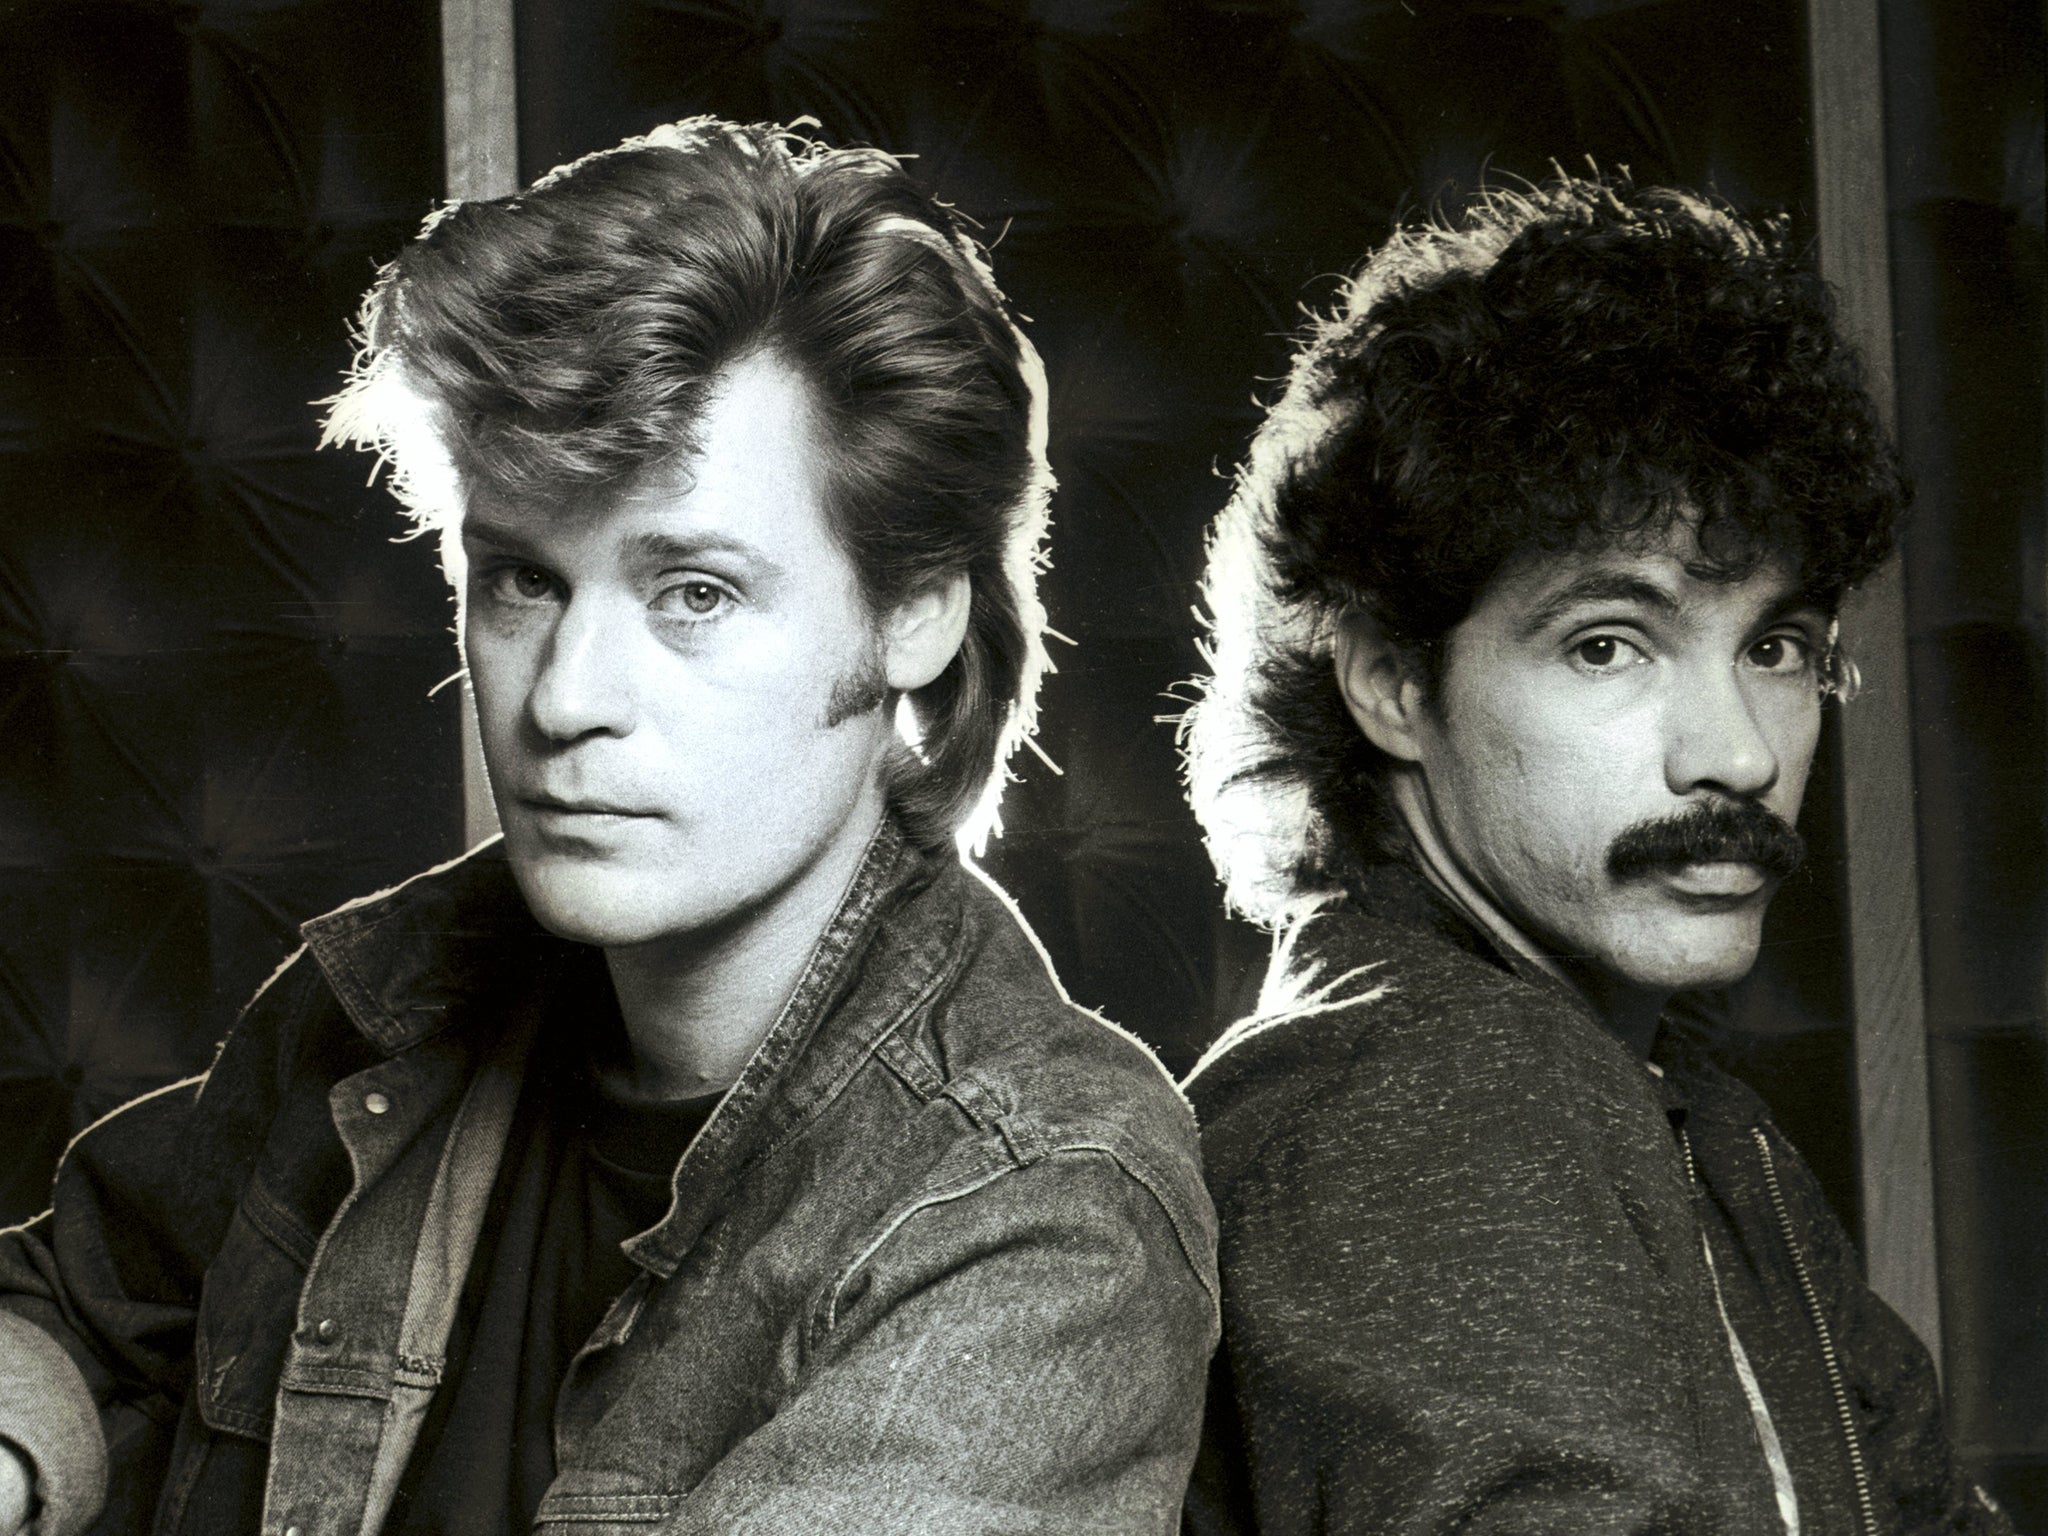 Daryl Hall & John Oates ‘Michael Jackson told me at Live Aid that “I